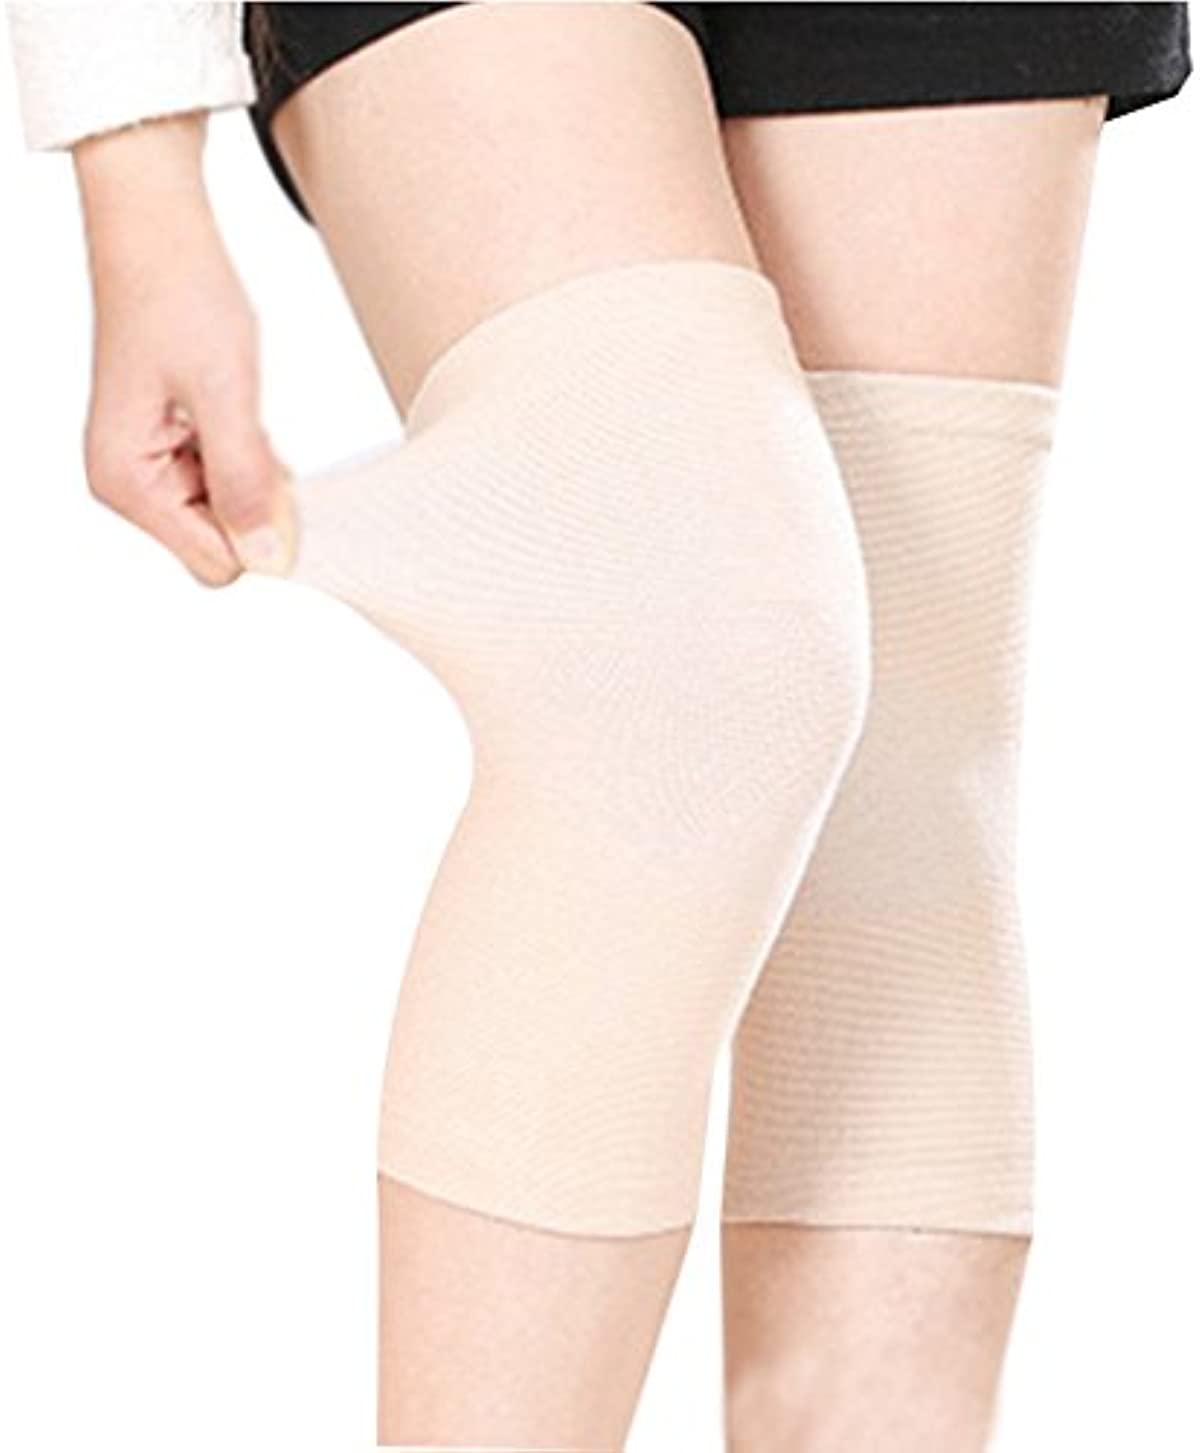 (One Pair) Bamboo Fabric Knee Sleeves for Knee Support, Circulation Improvement & Pain Relief,Sport Compression for Running, Pain Management, Arthritis Pain Women & Men (Complexion, Small)